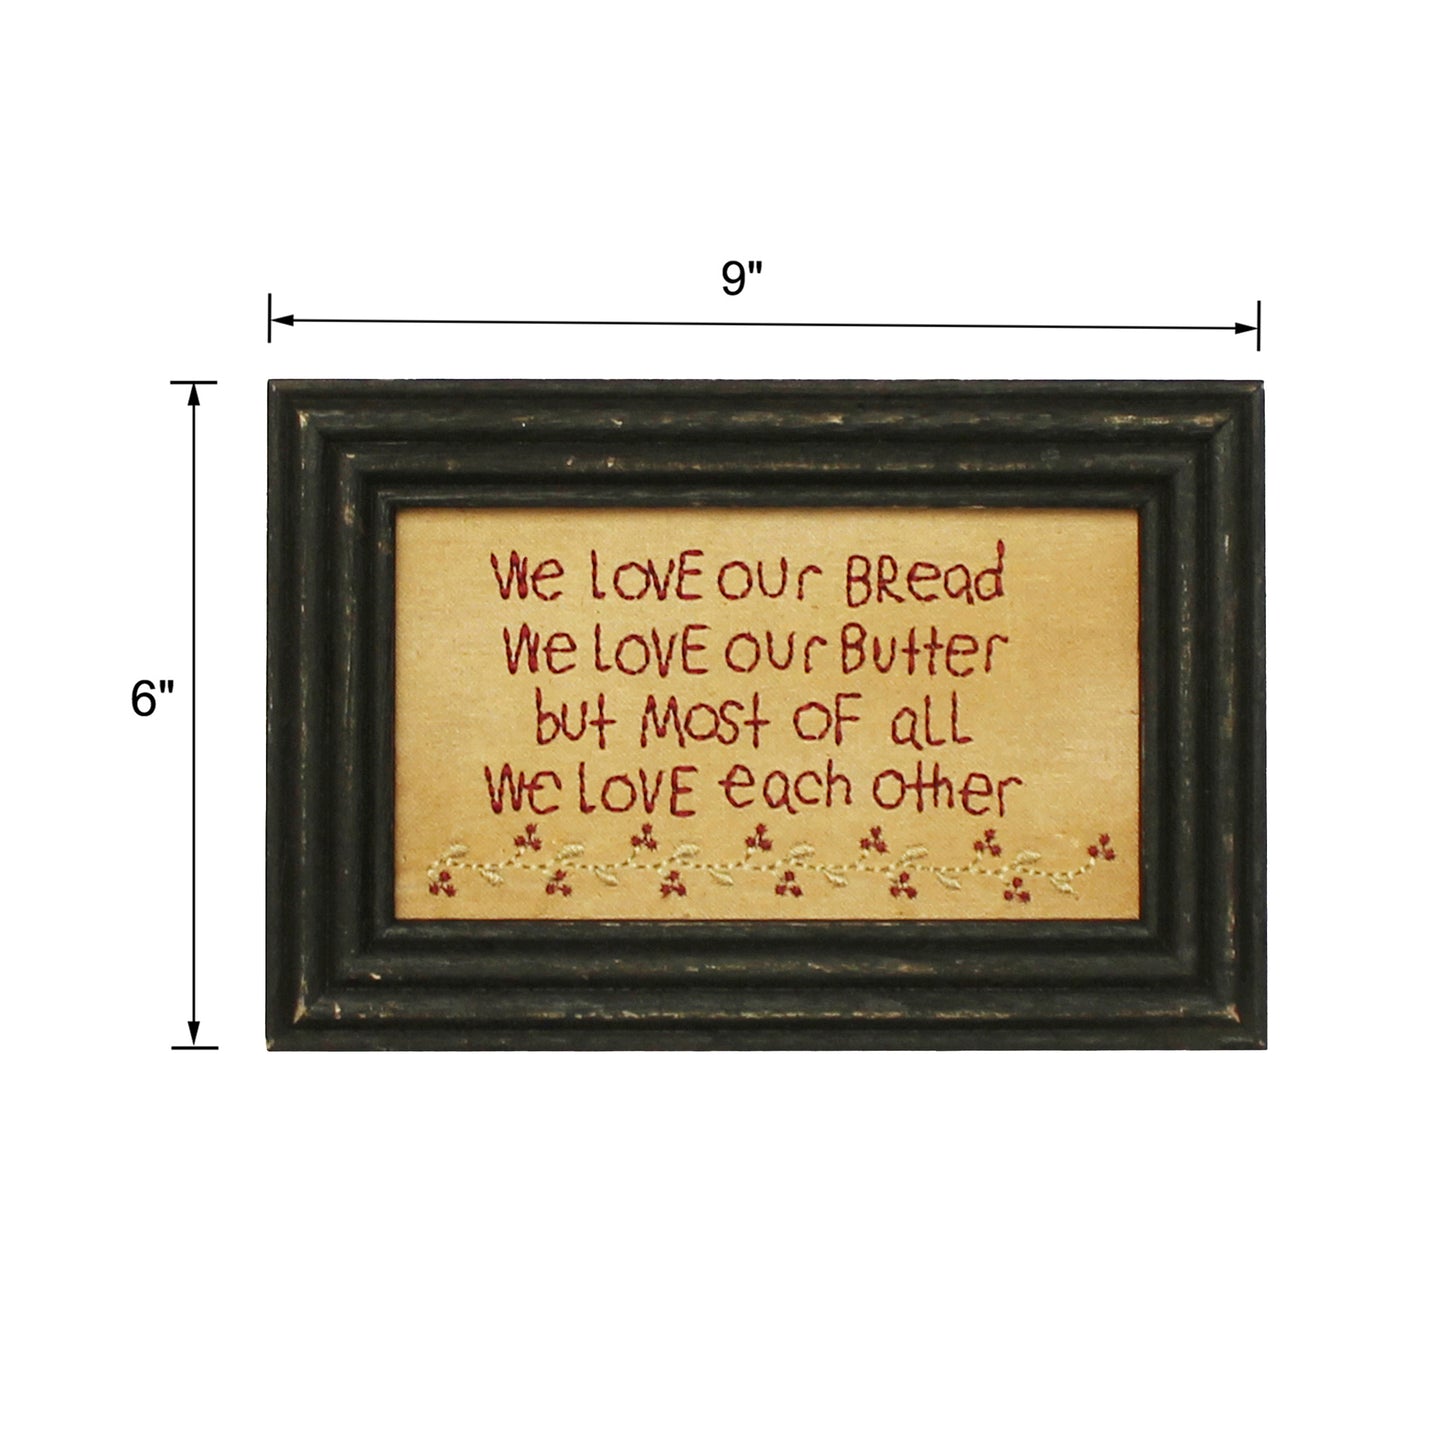 CVHOMEDECO. Primitives Antique We Love Our Bread, We Love Our Butter, But Most of All We Love Each Other Stitchery Frame Wall Mounted Hanging Decor Art, 9 x 6 Inch